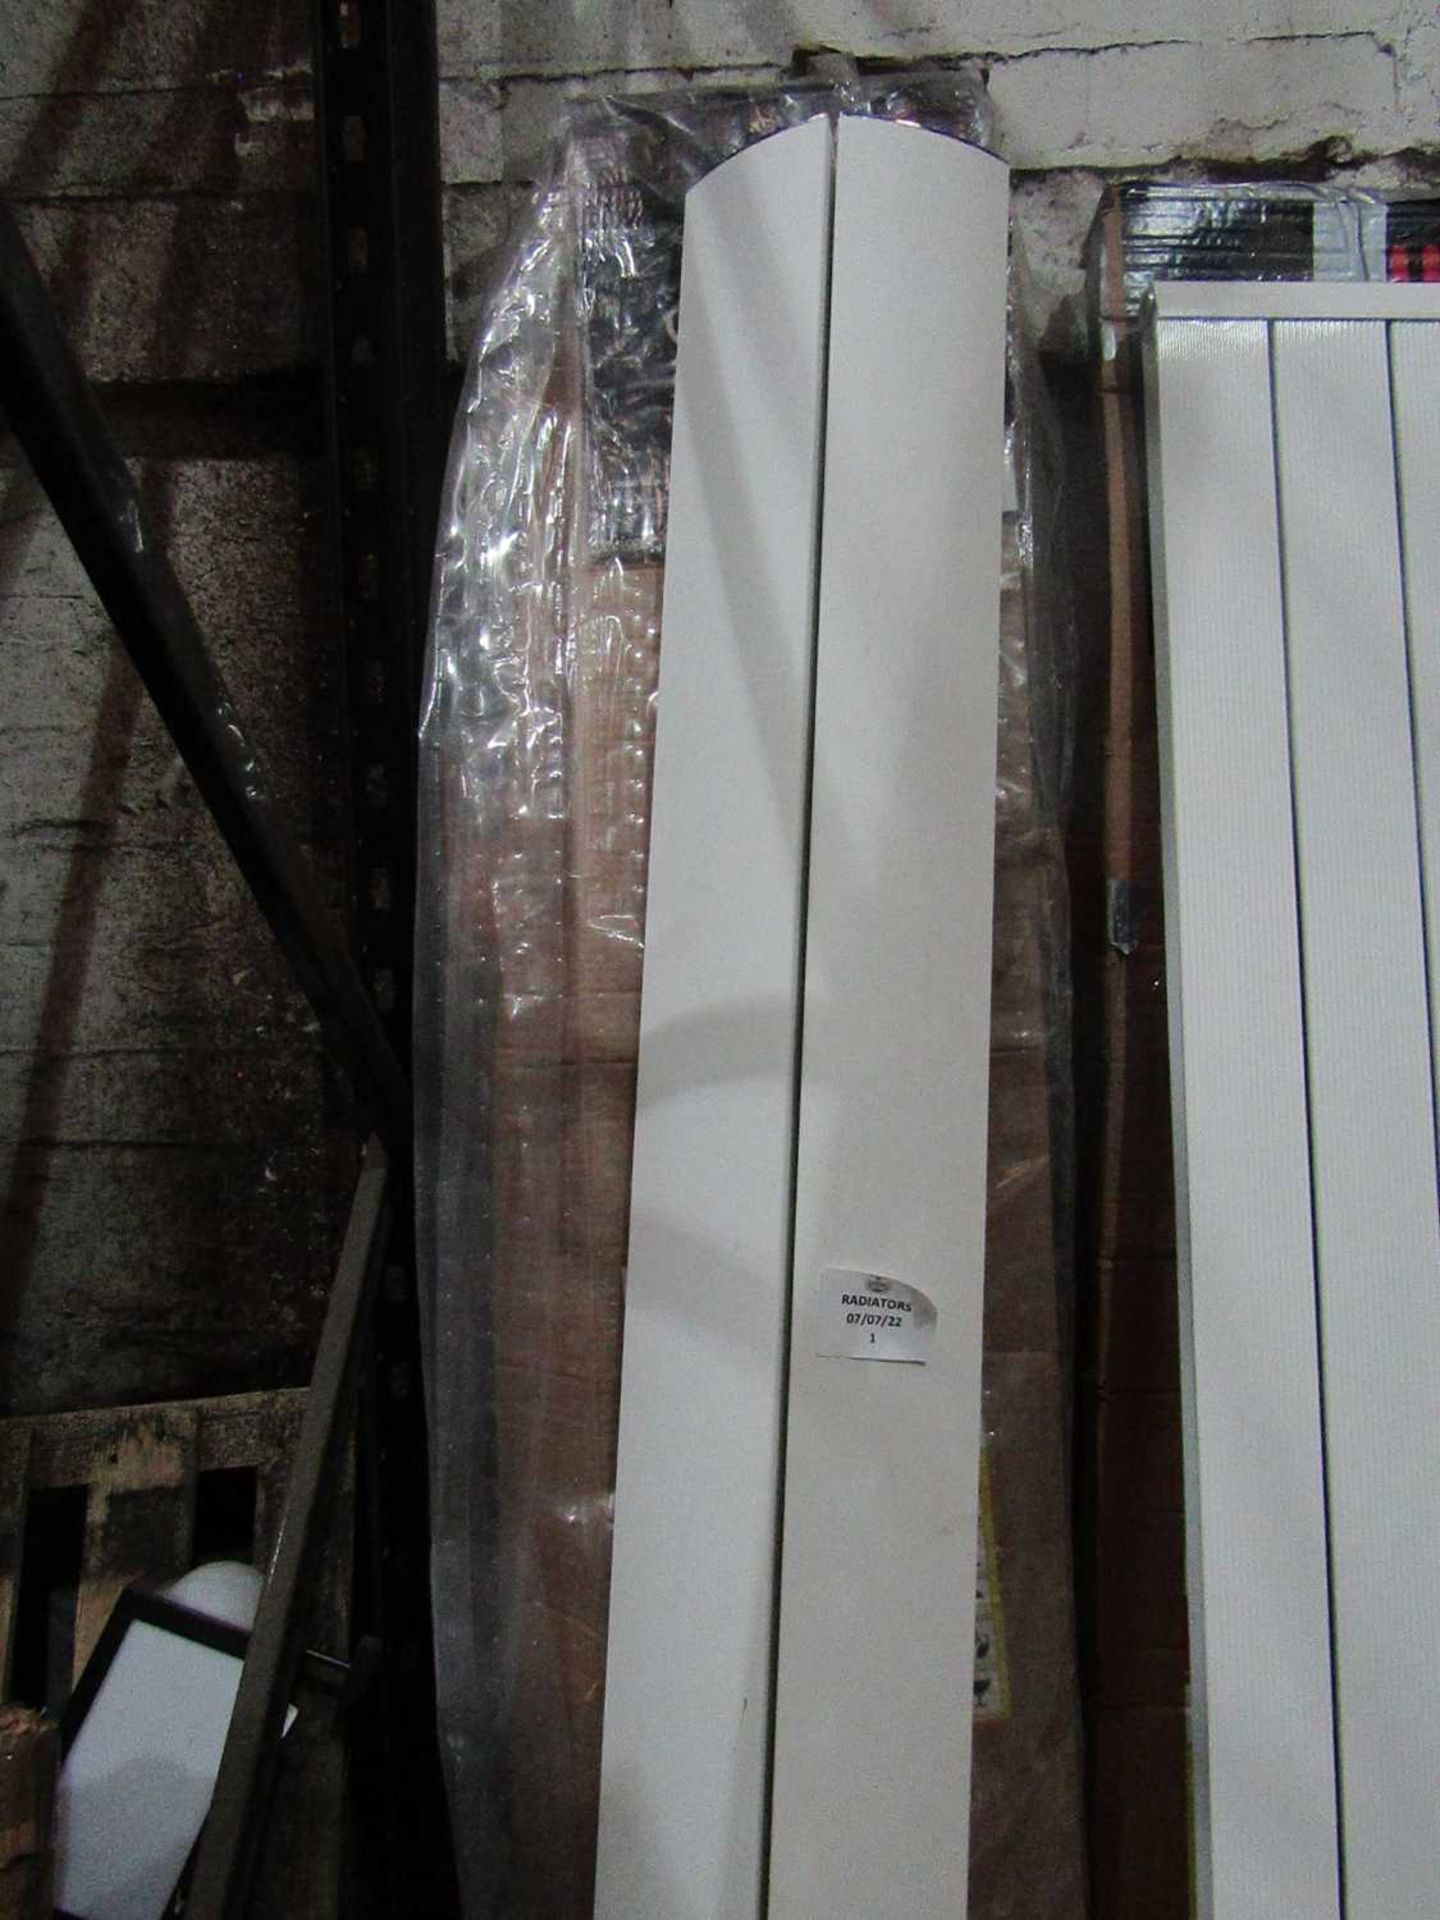 Carisa - Nixie Tall Radiator - White - 1800x205mm - Some Marks Present, However Still Good Condition